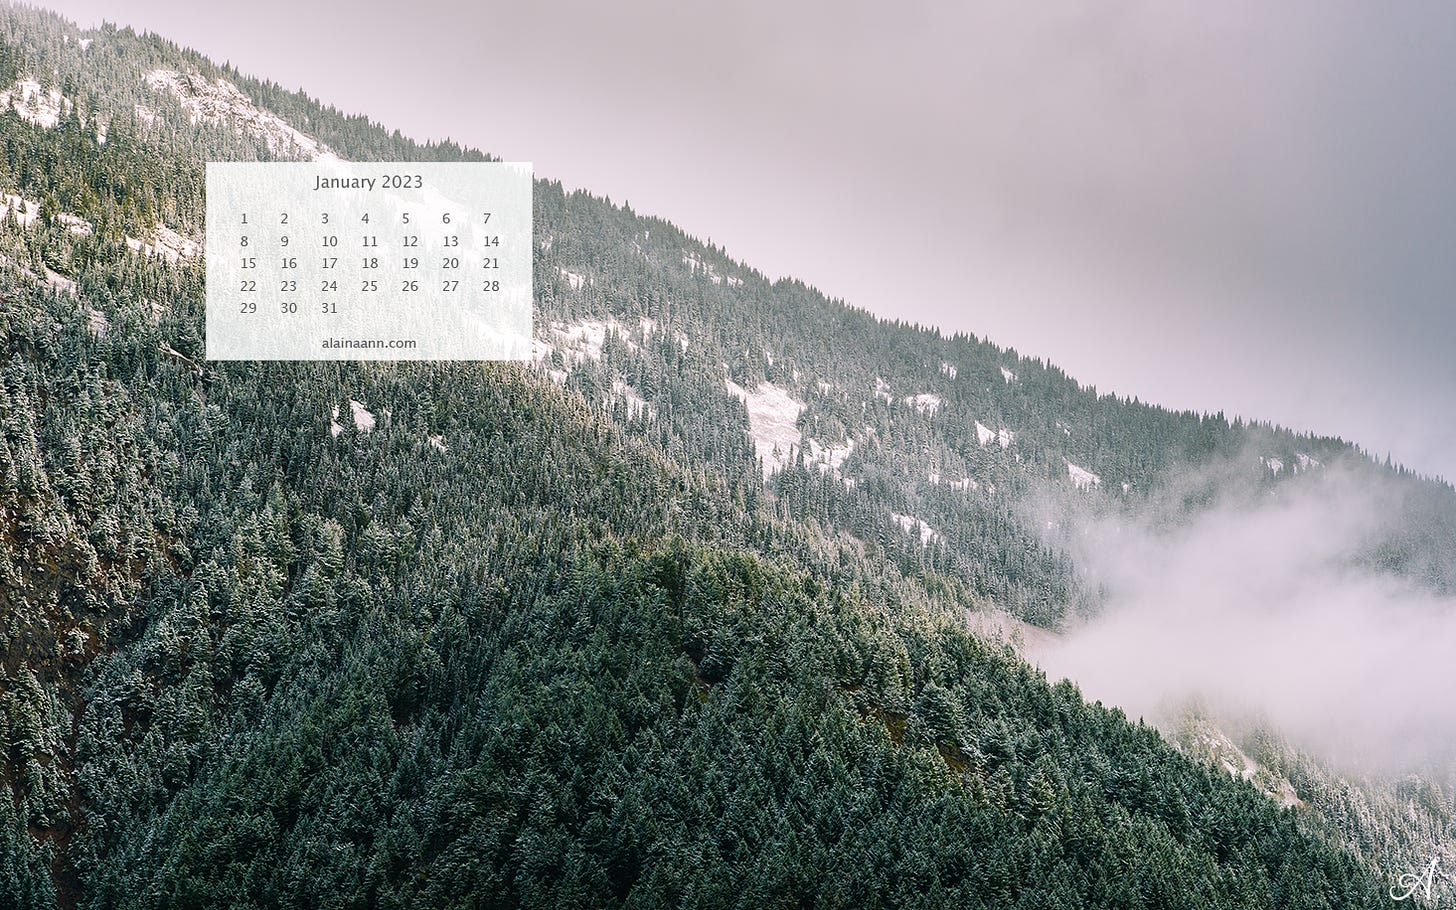 Photo of a snow covered mountainside with a January 2023 calendar overlayed in the upper left corner.